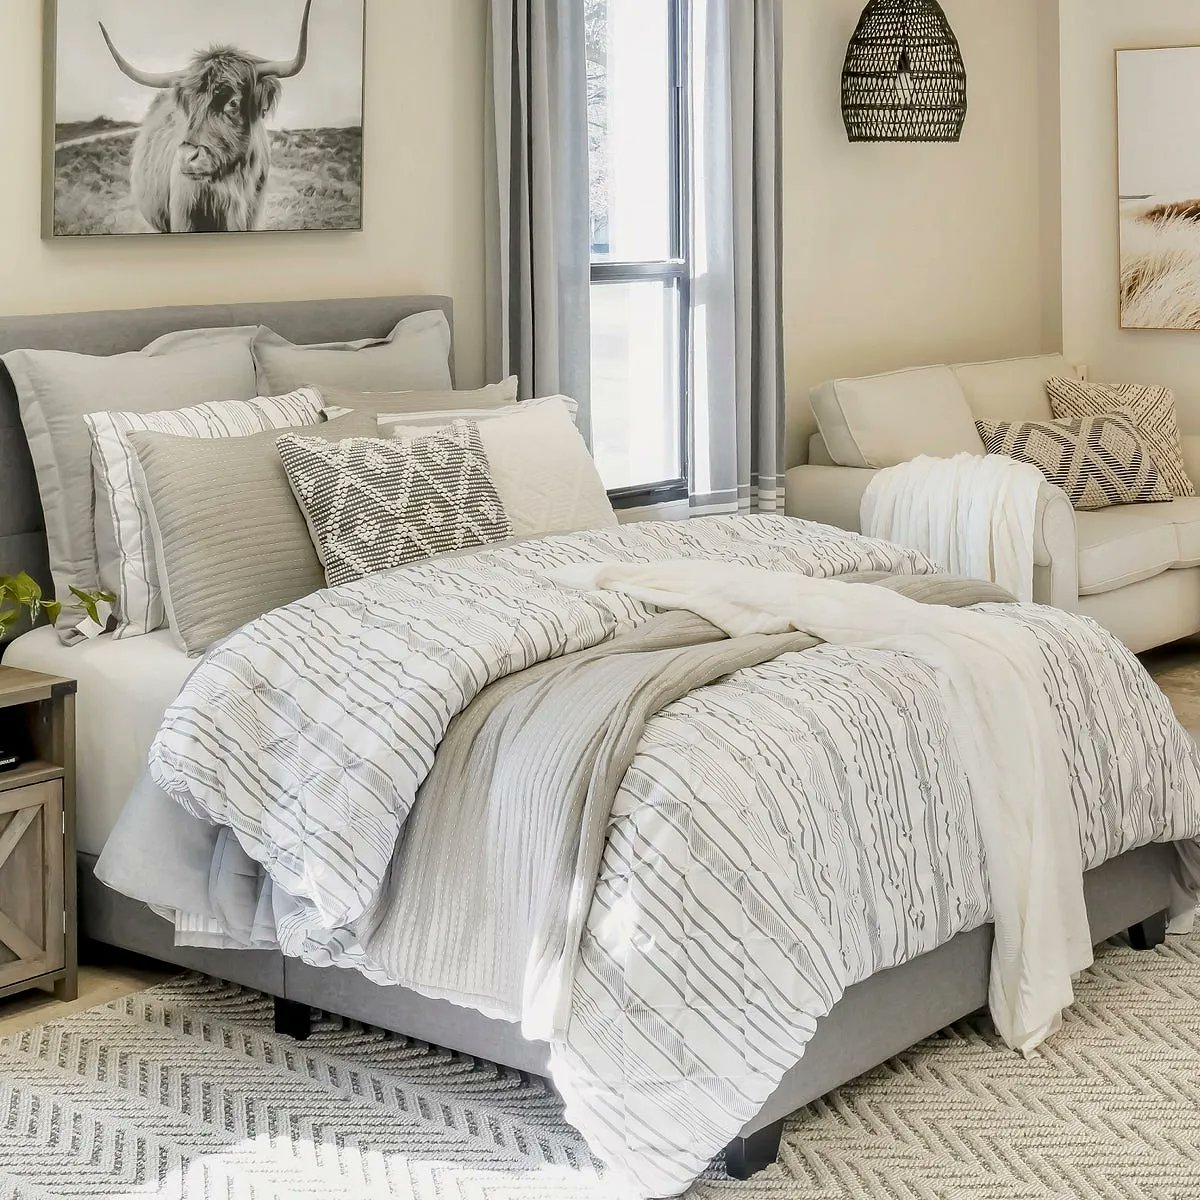 🌾 How To Add Farmhouse Elements to Your Bedroom Without Breaking the Bank - buff.ly/42F5zHr 

#homedecor #farmhousestyle #farmhousedecor #homedecorblog